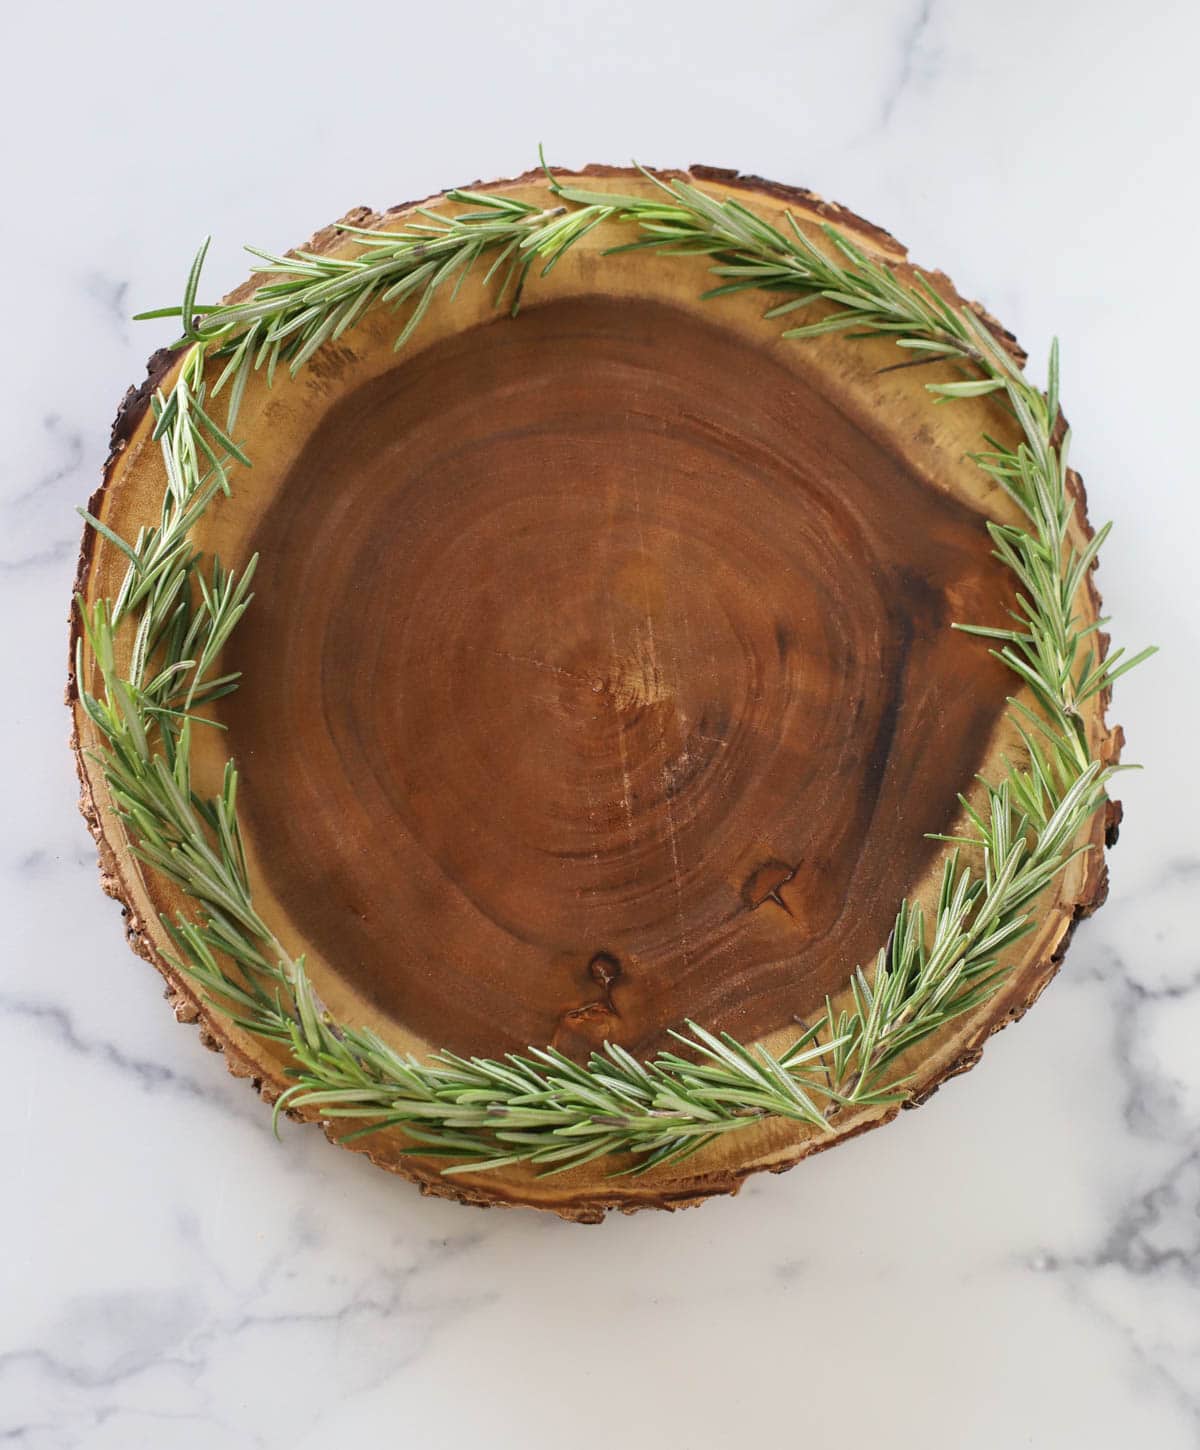 Round board rimmed with rosemary.